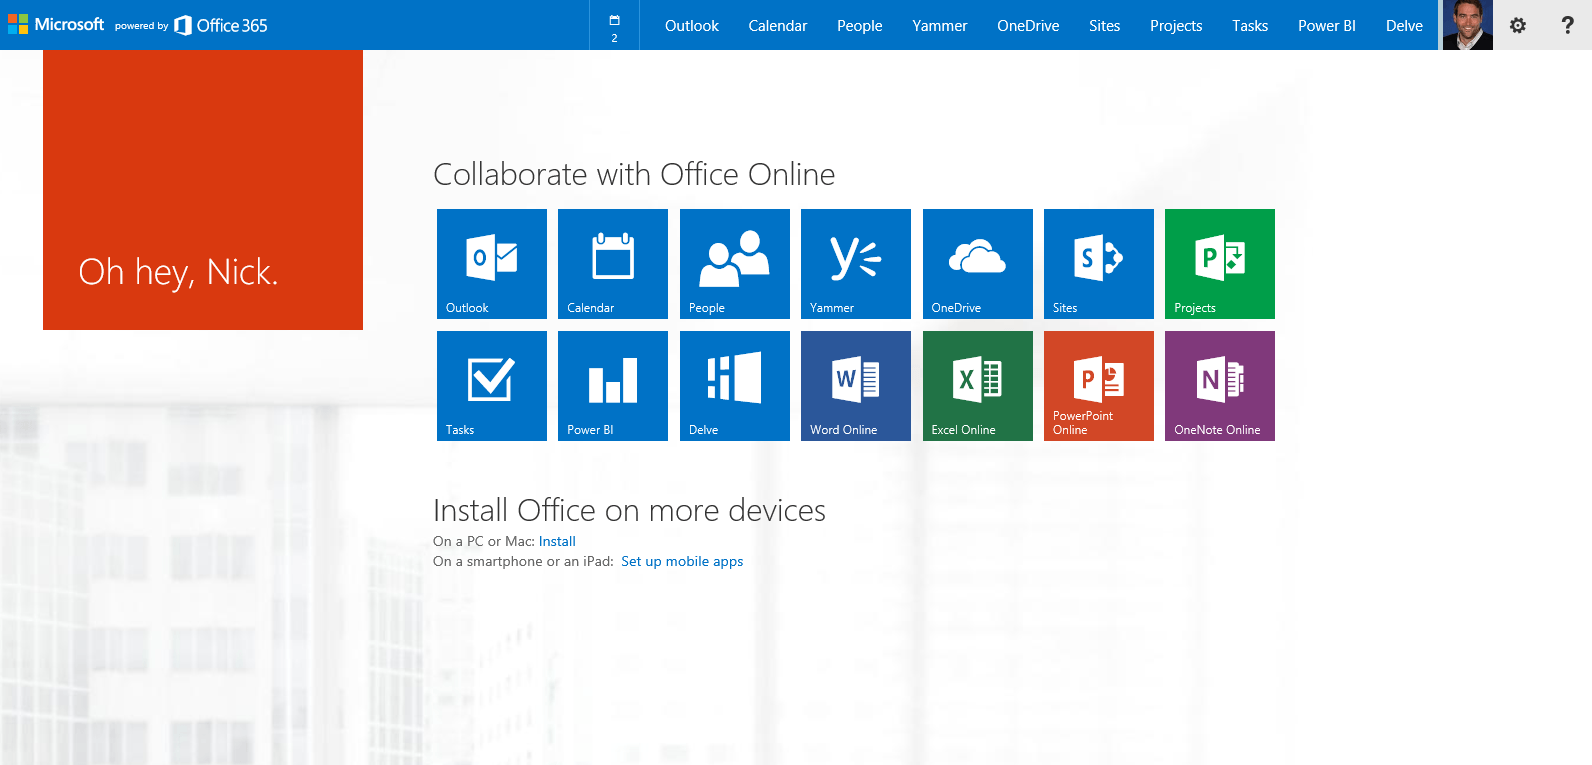 New Office 365 Logo - Launch documents and get started right away with the new Office 365